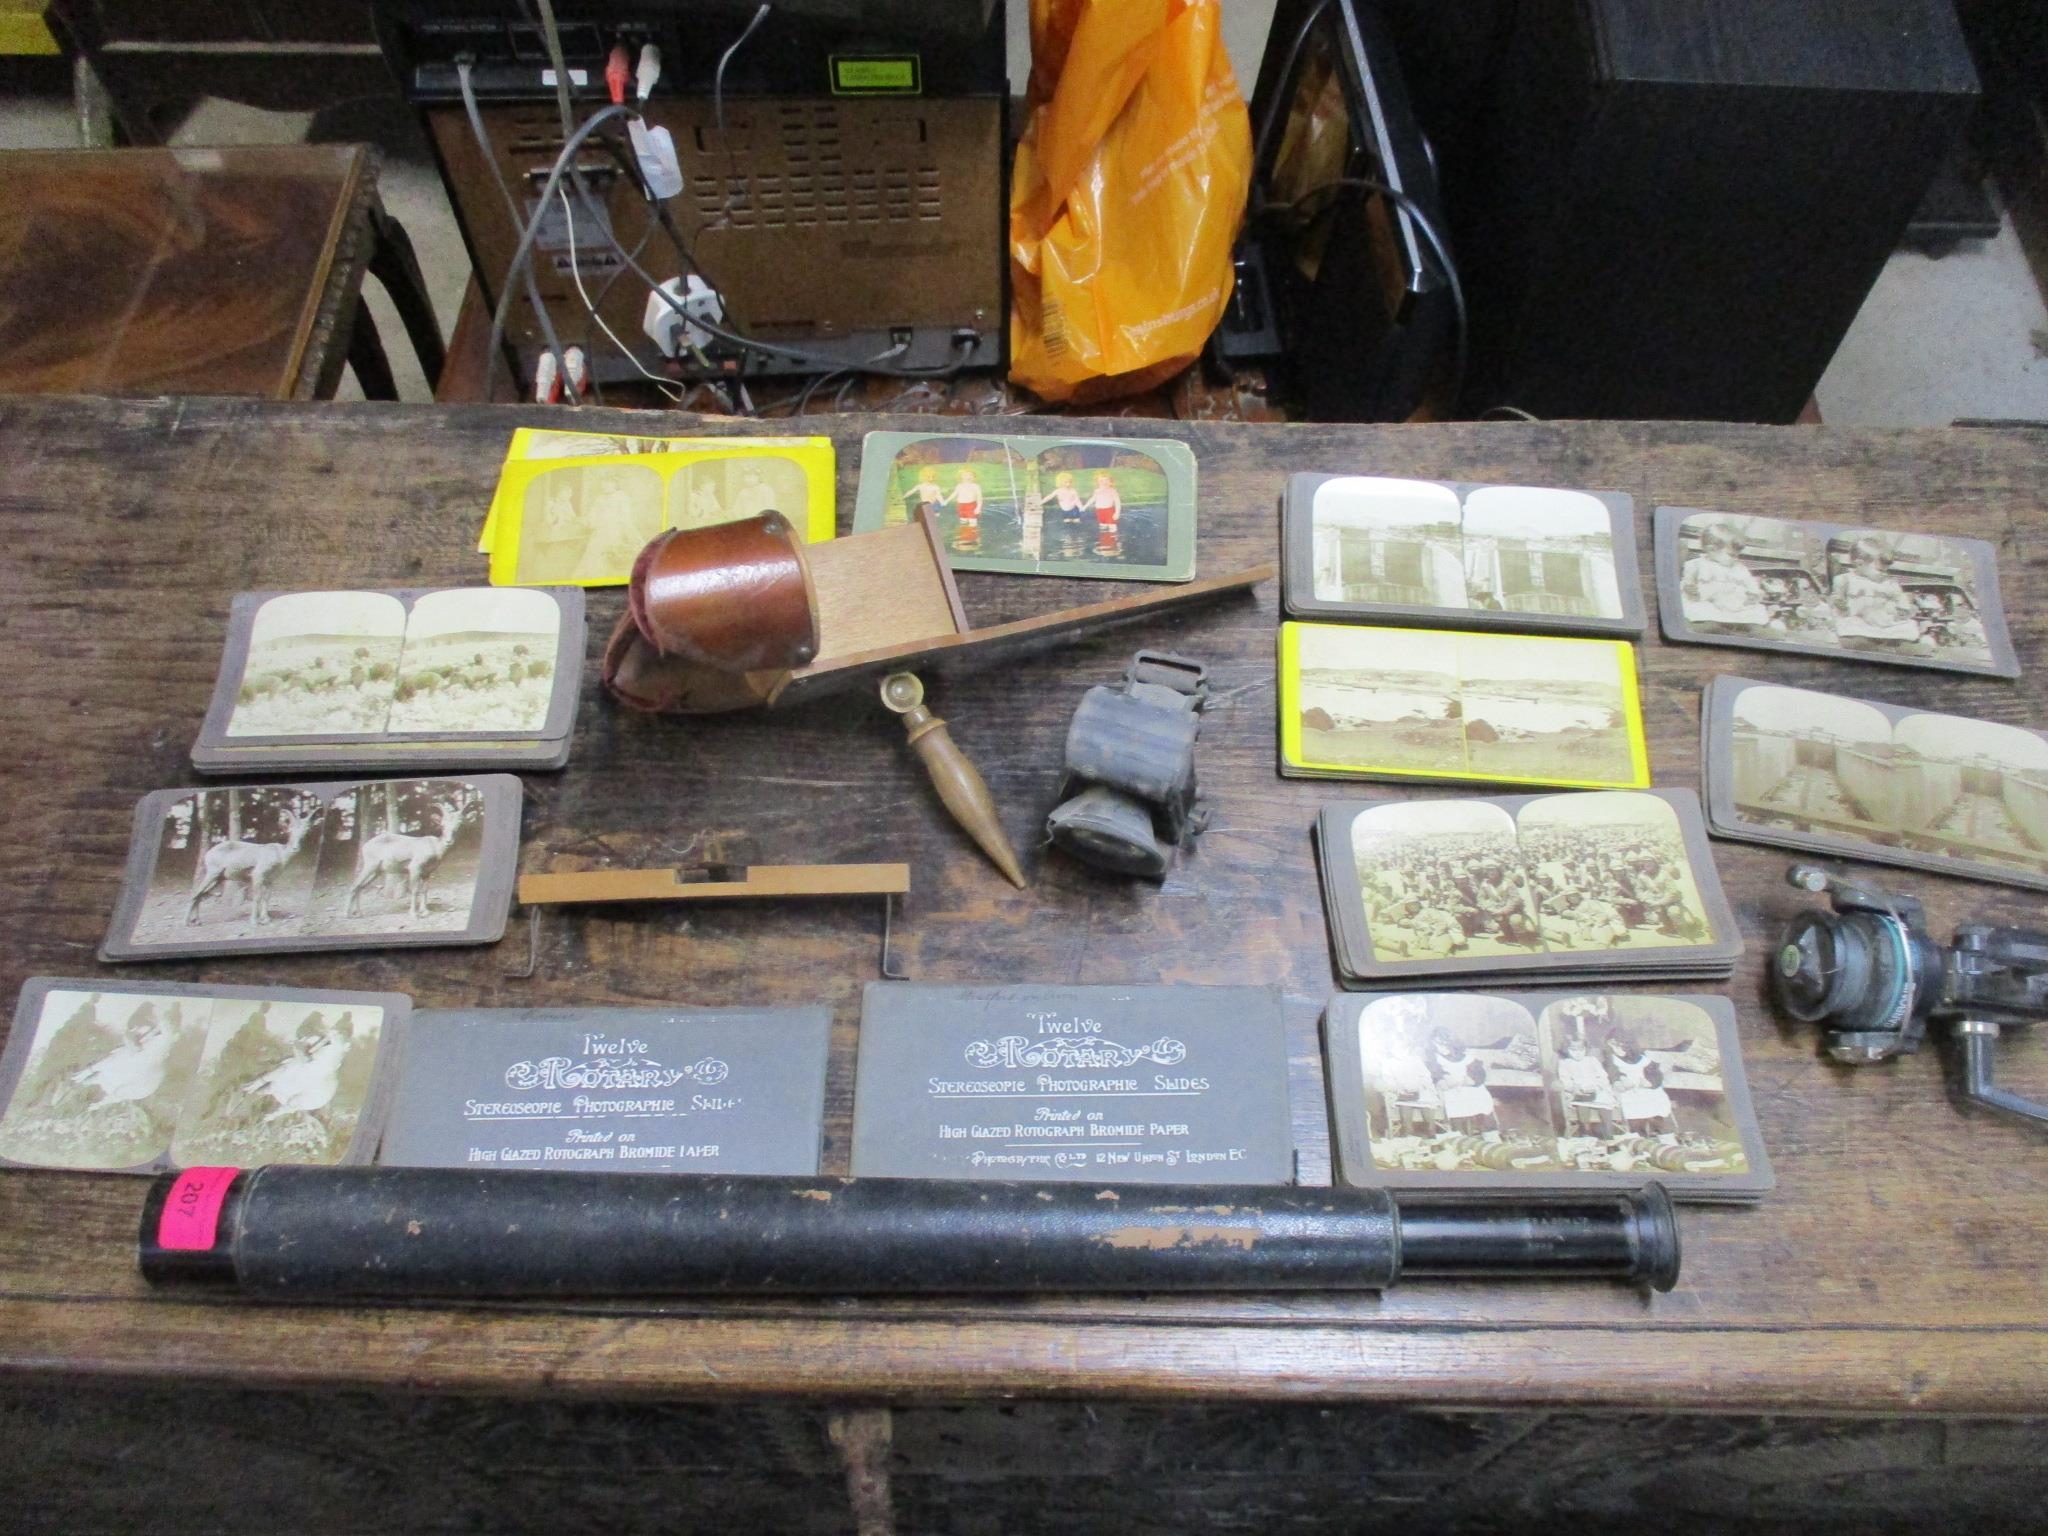 A Victorian Stereoscope with various slides, a vintage Combes Bros bicycle lamp, a Hughes & Son